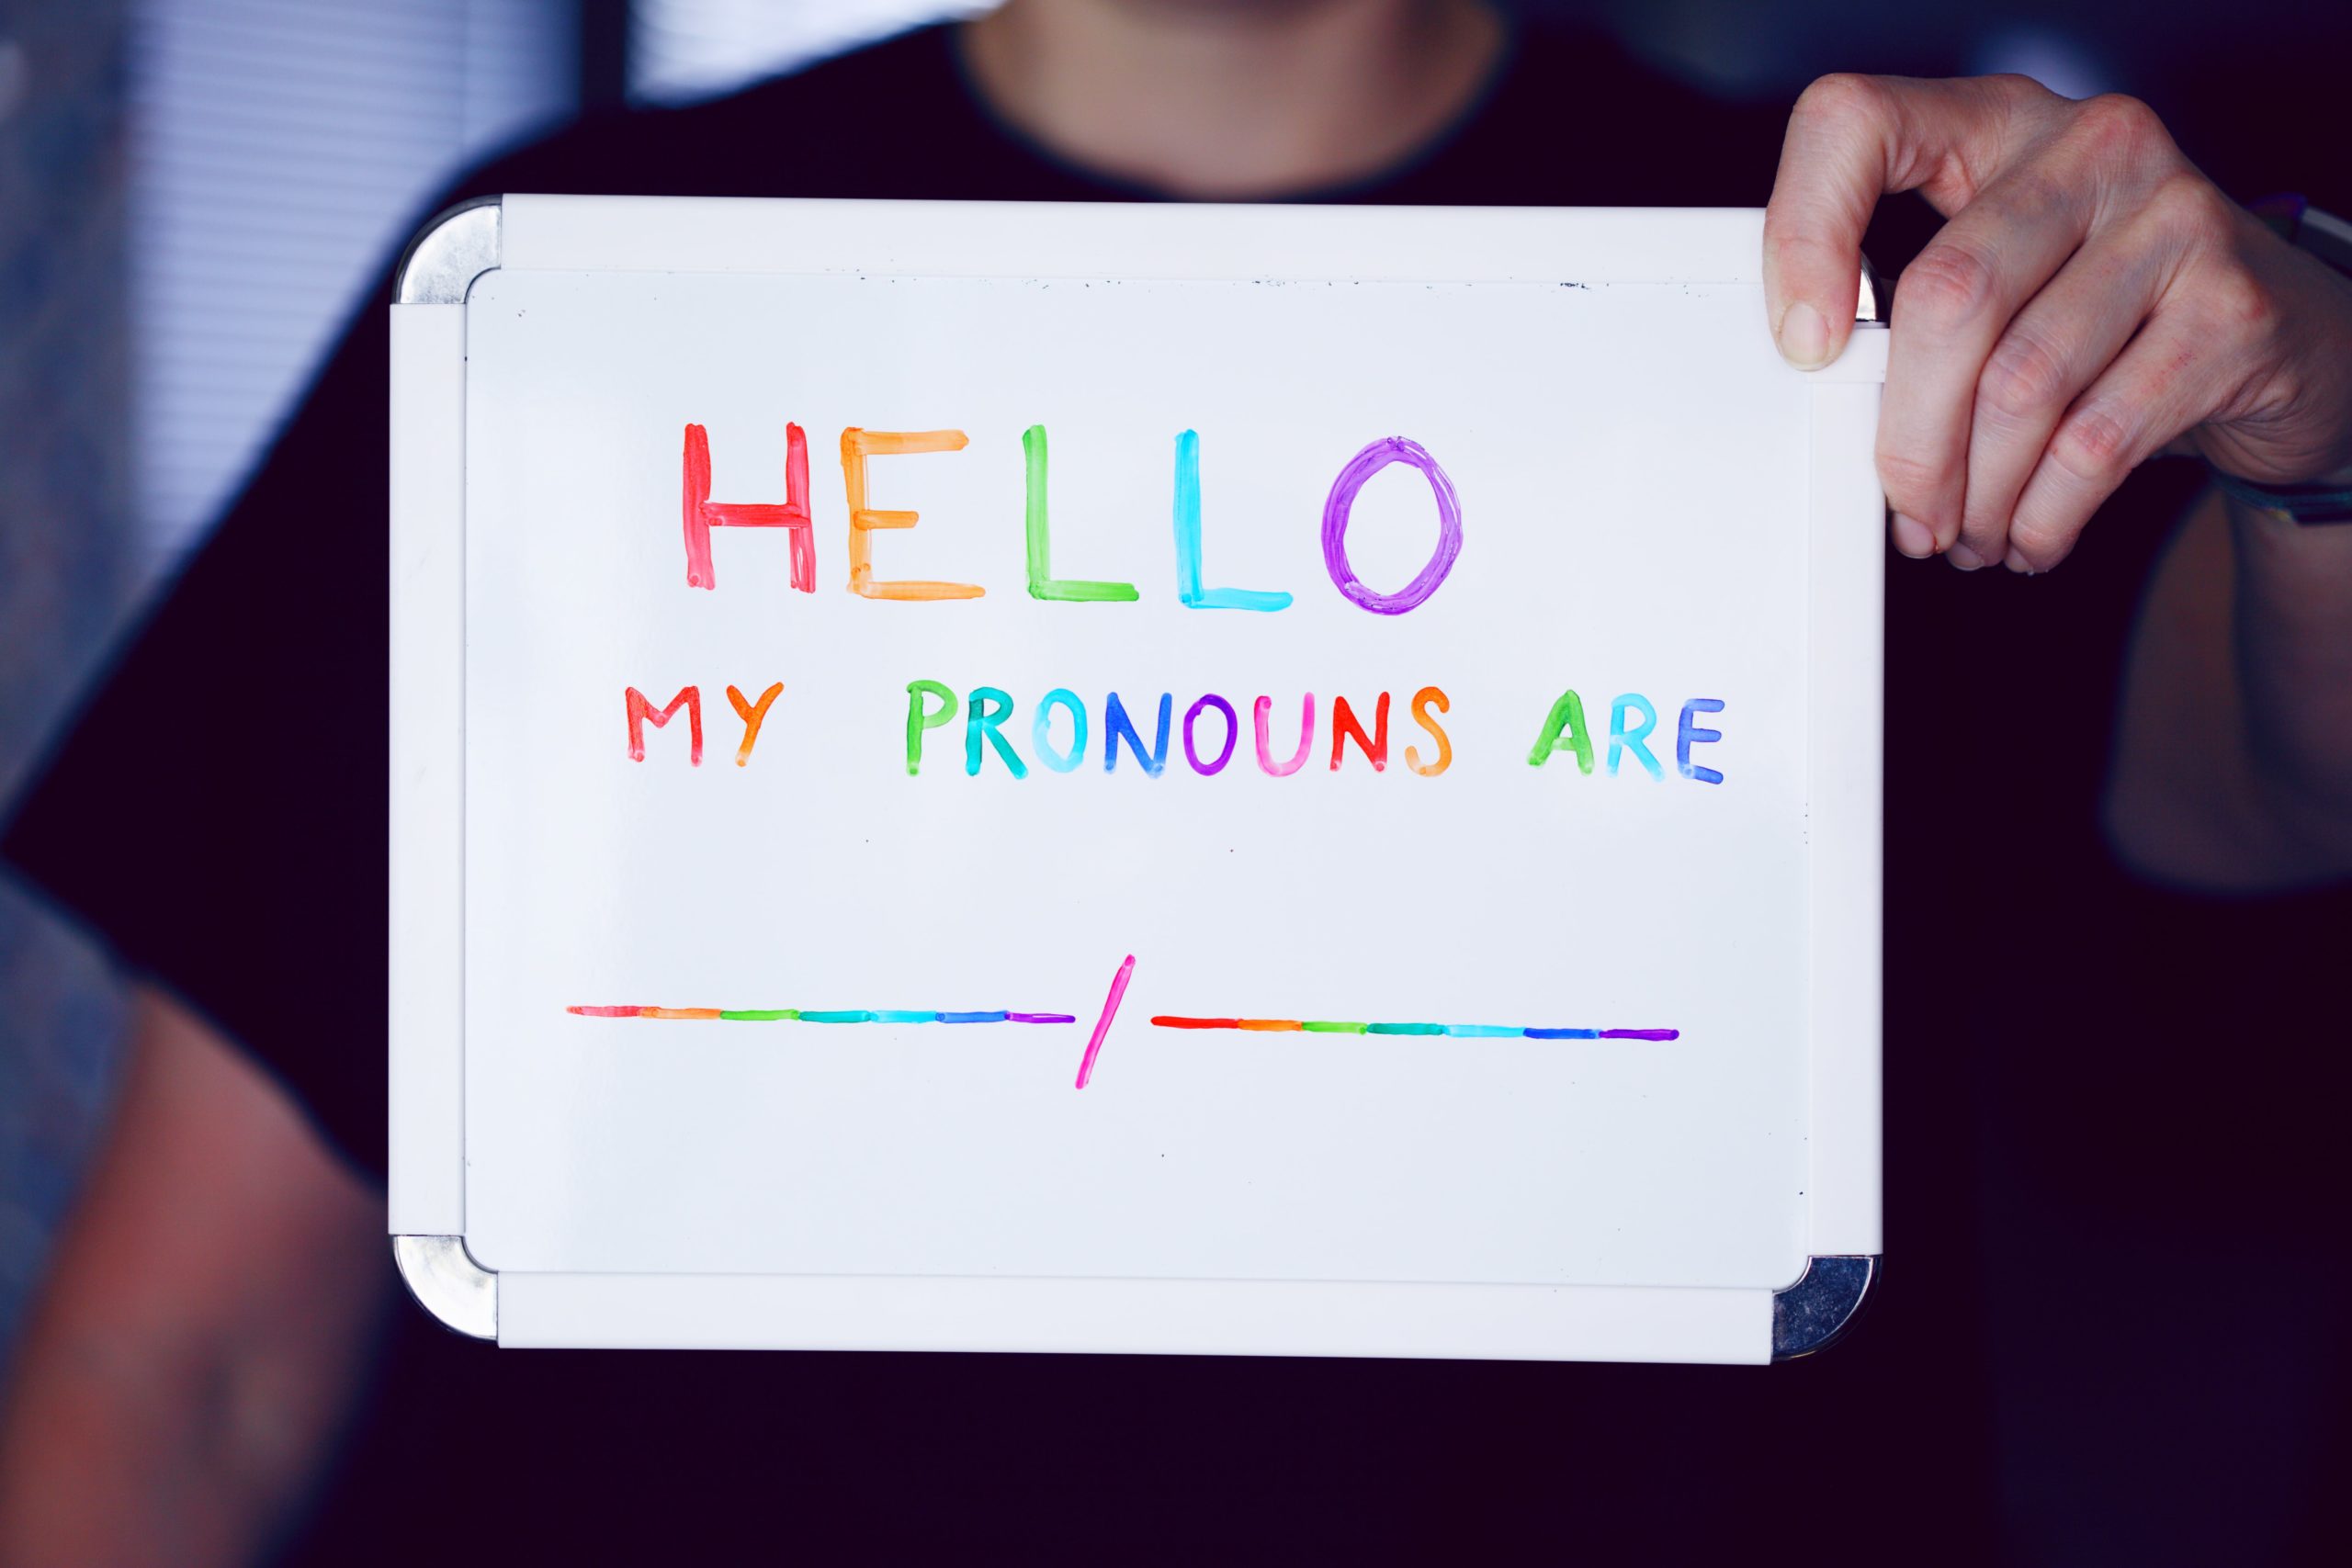 Sharing Pronouns as an Inclusive Teaching Practice